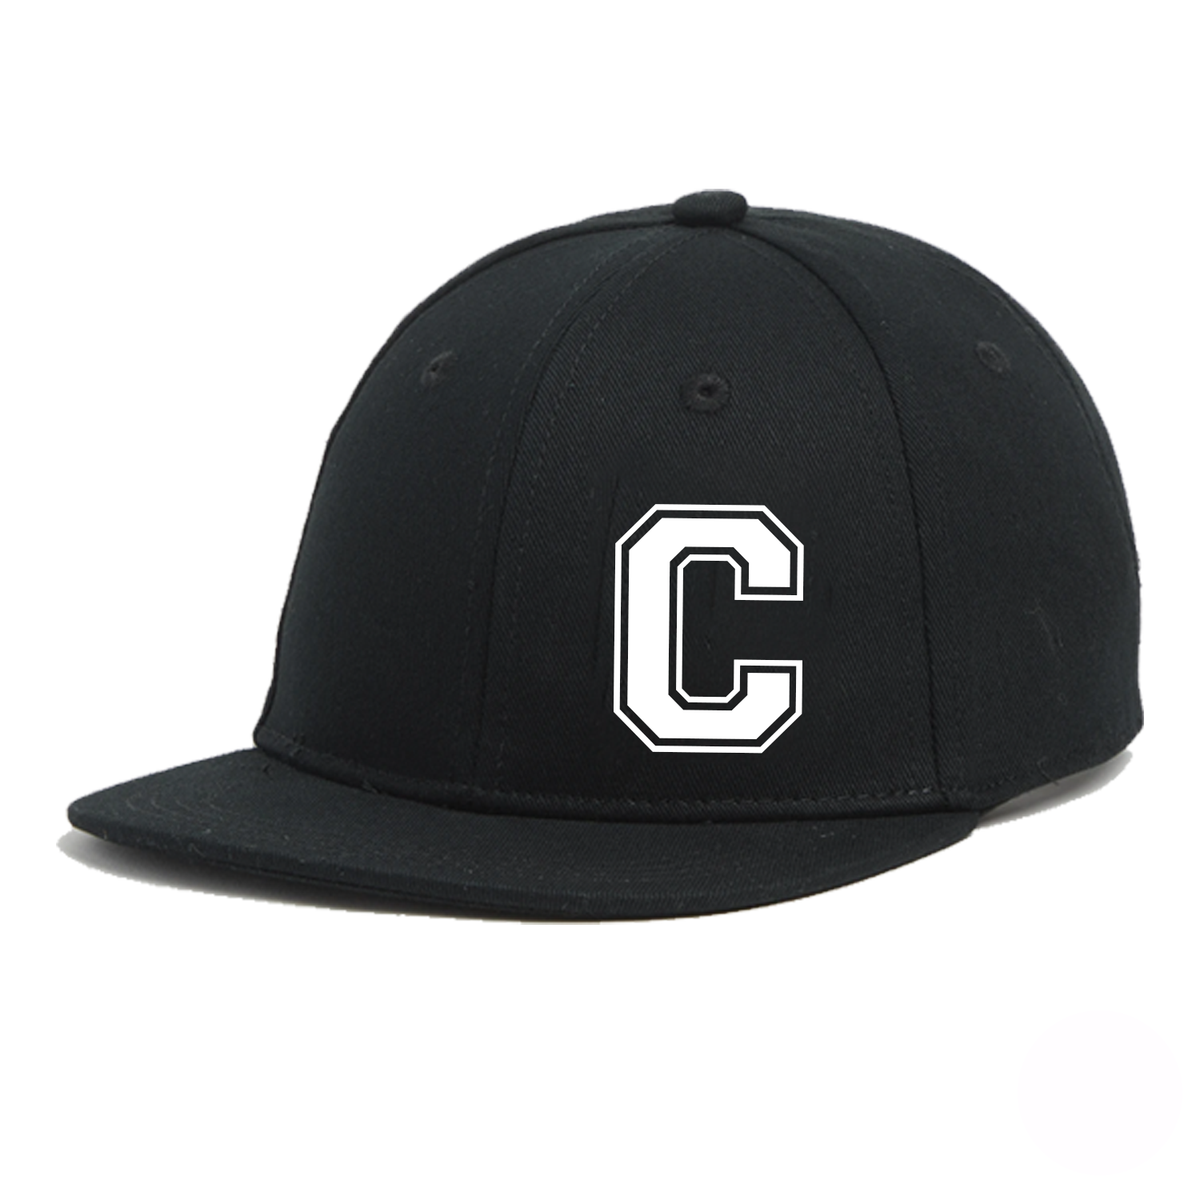 Personalised Black Varsity Letter Snap Back Cap - 3 different size options